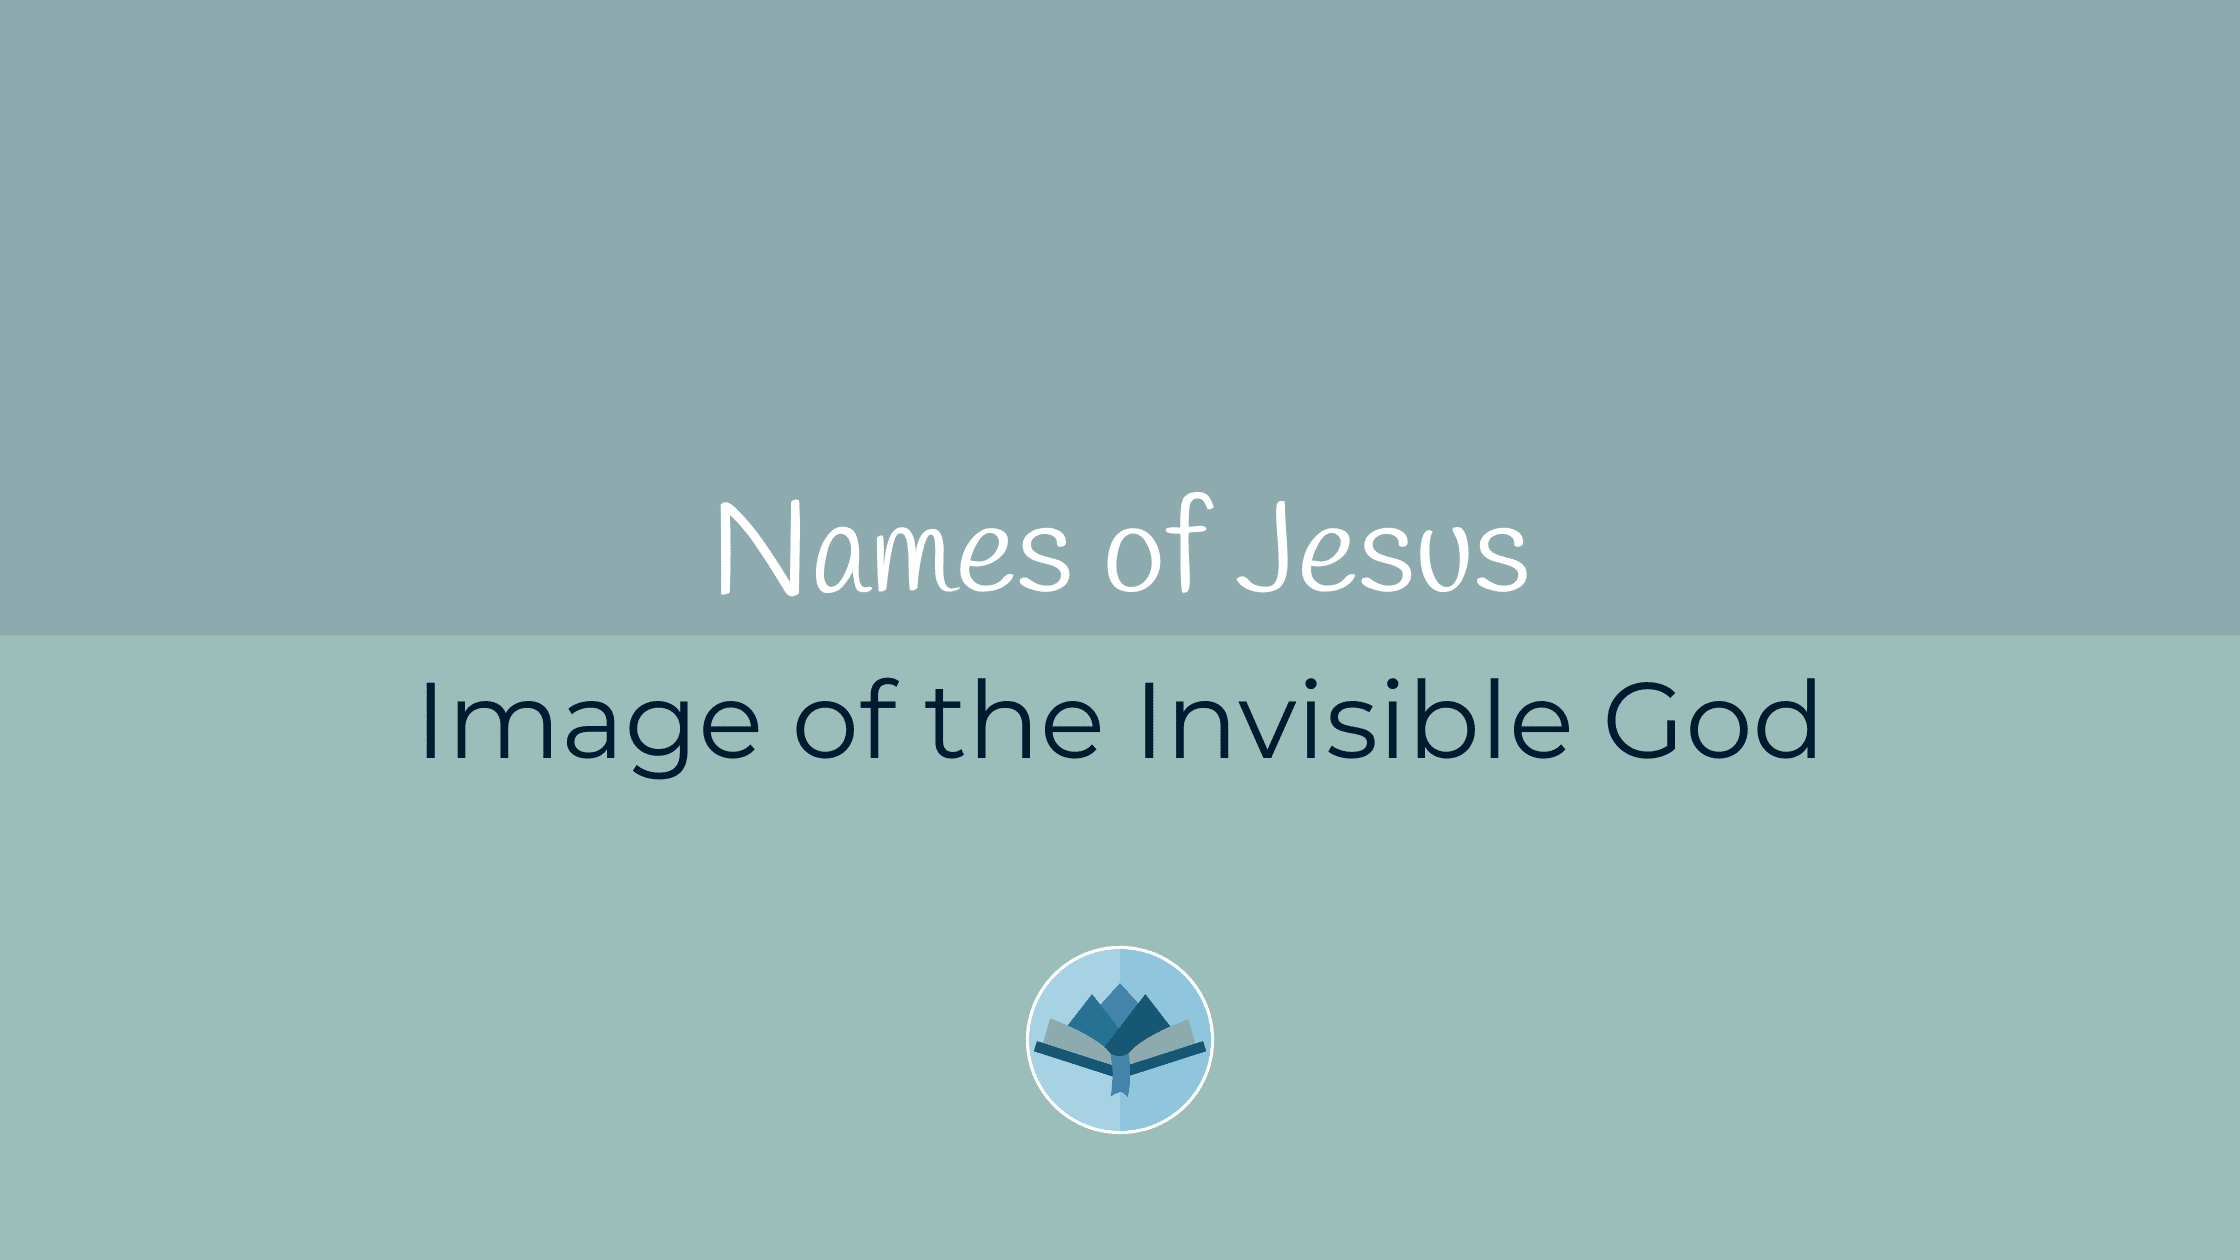 Names of Jesus Image of the Invisible God